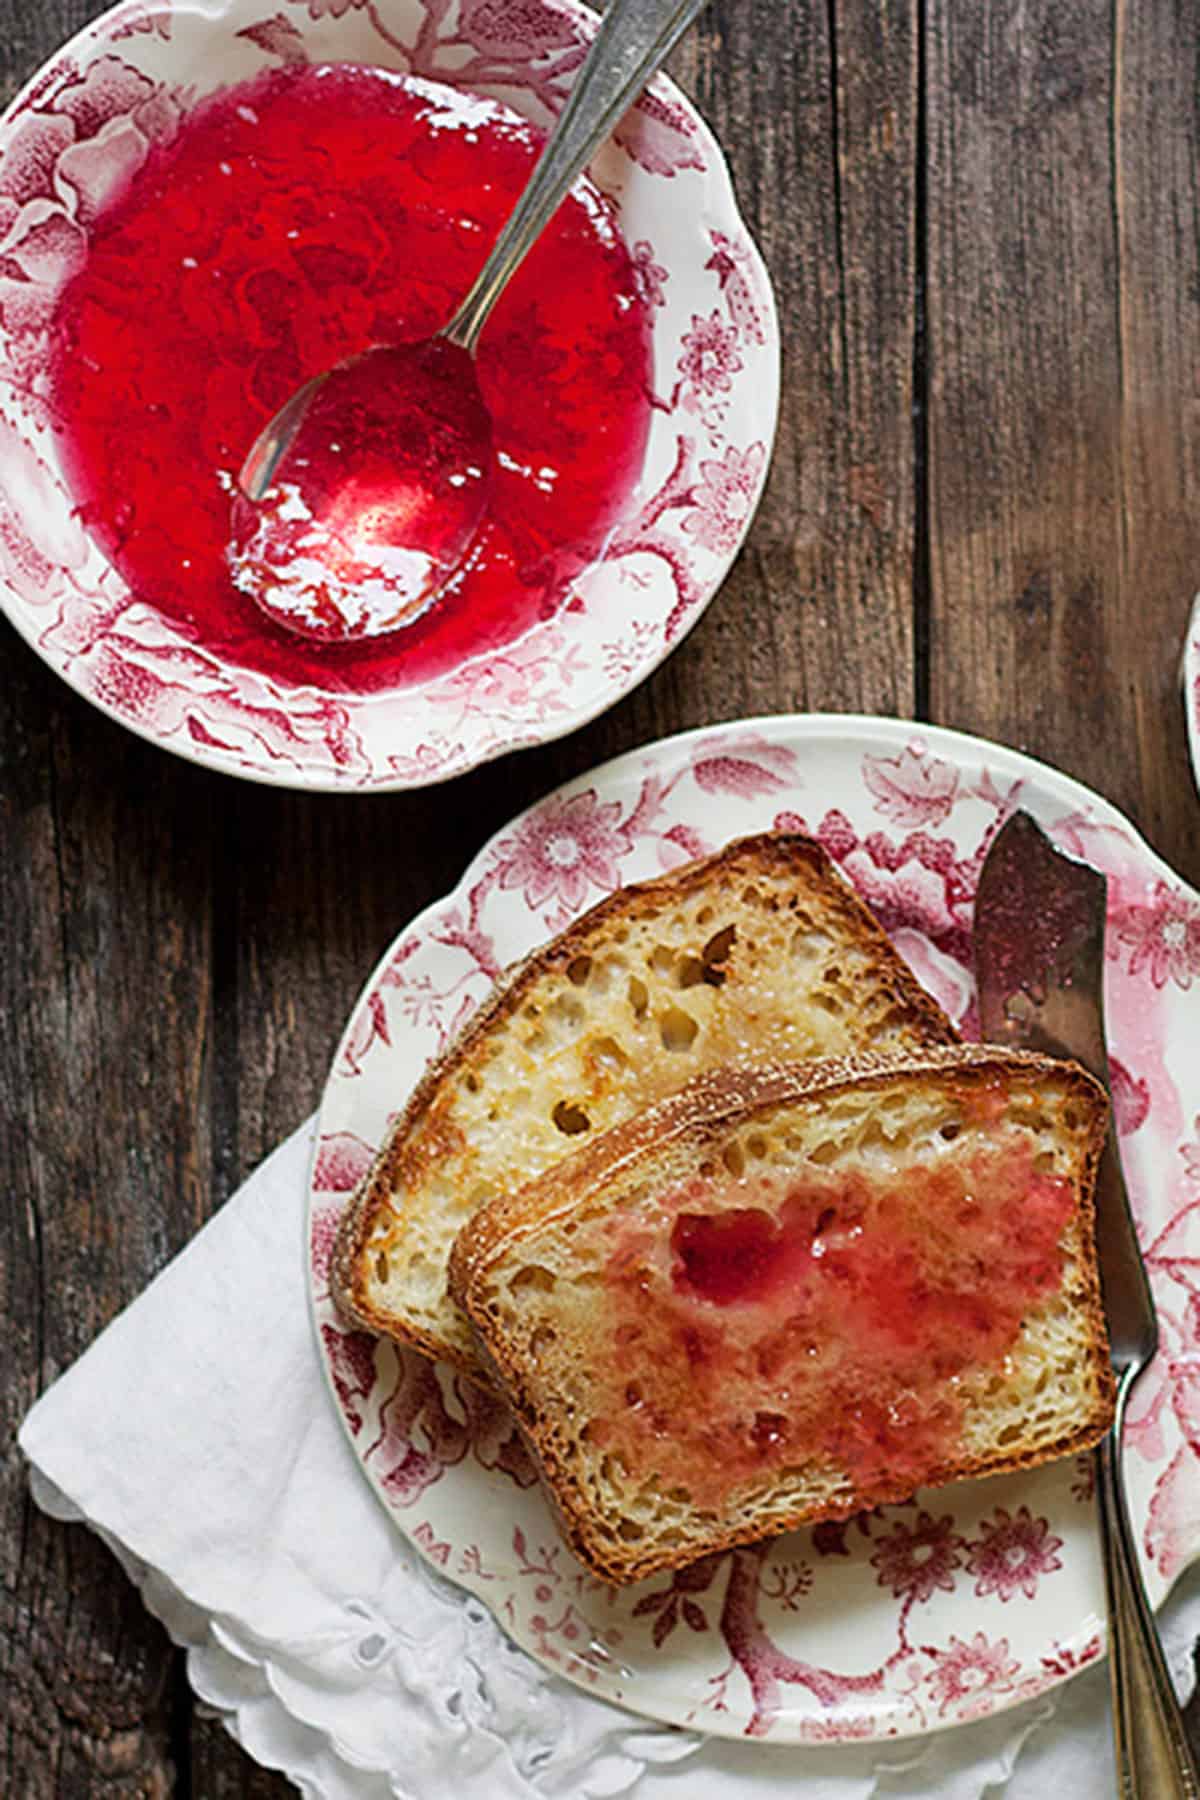 crabapple jelly in bowl with toast